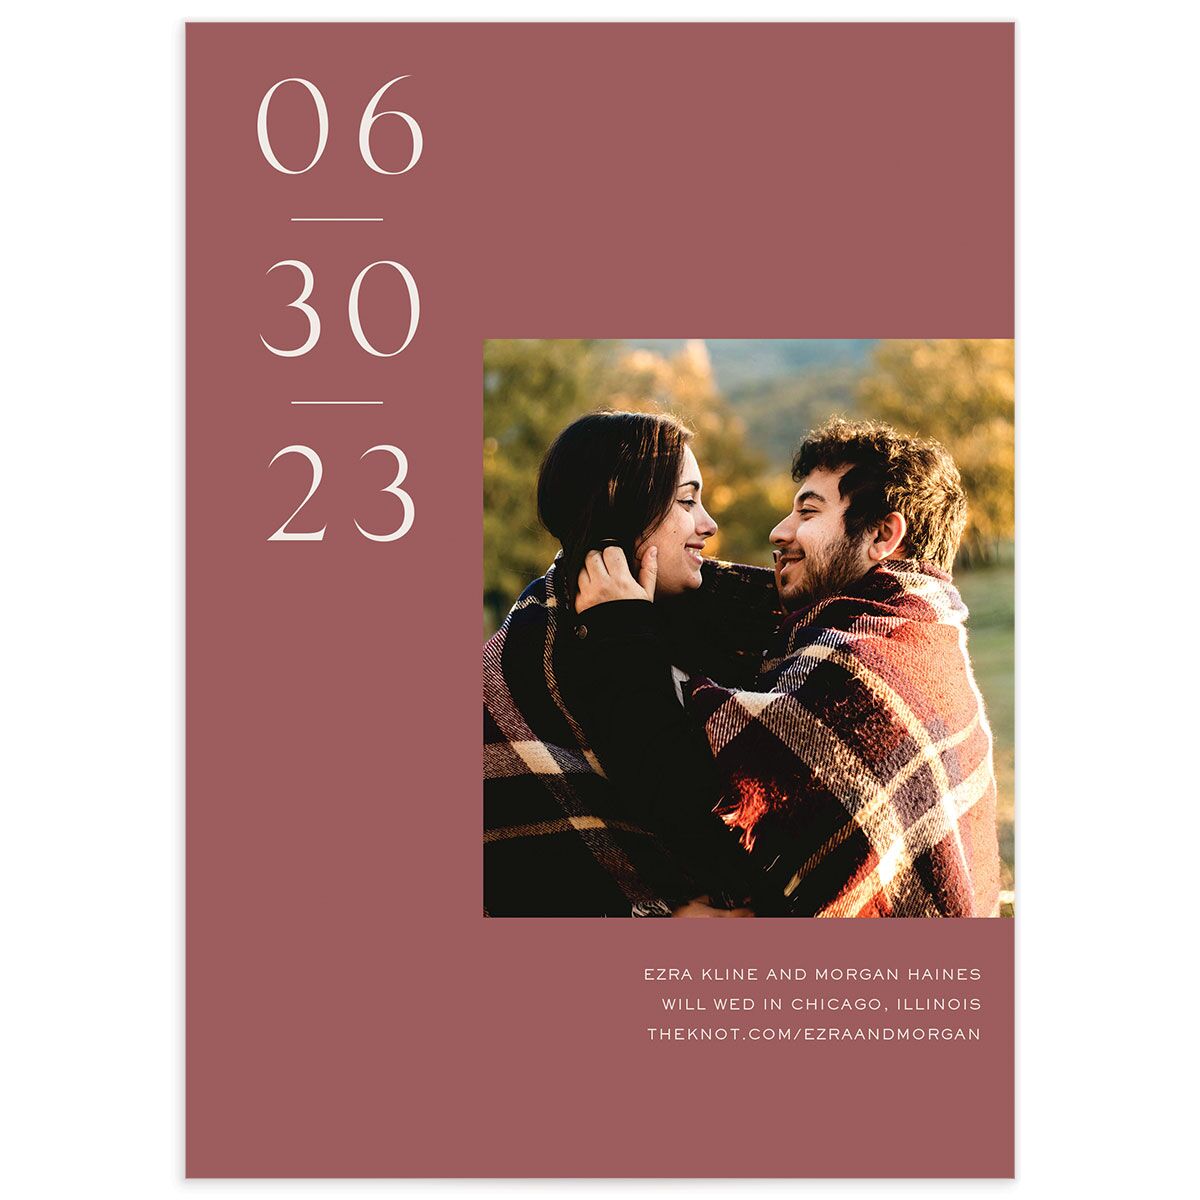 Modern Love Save the Date Cards